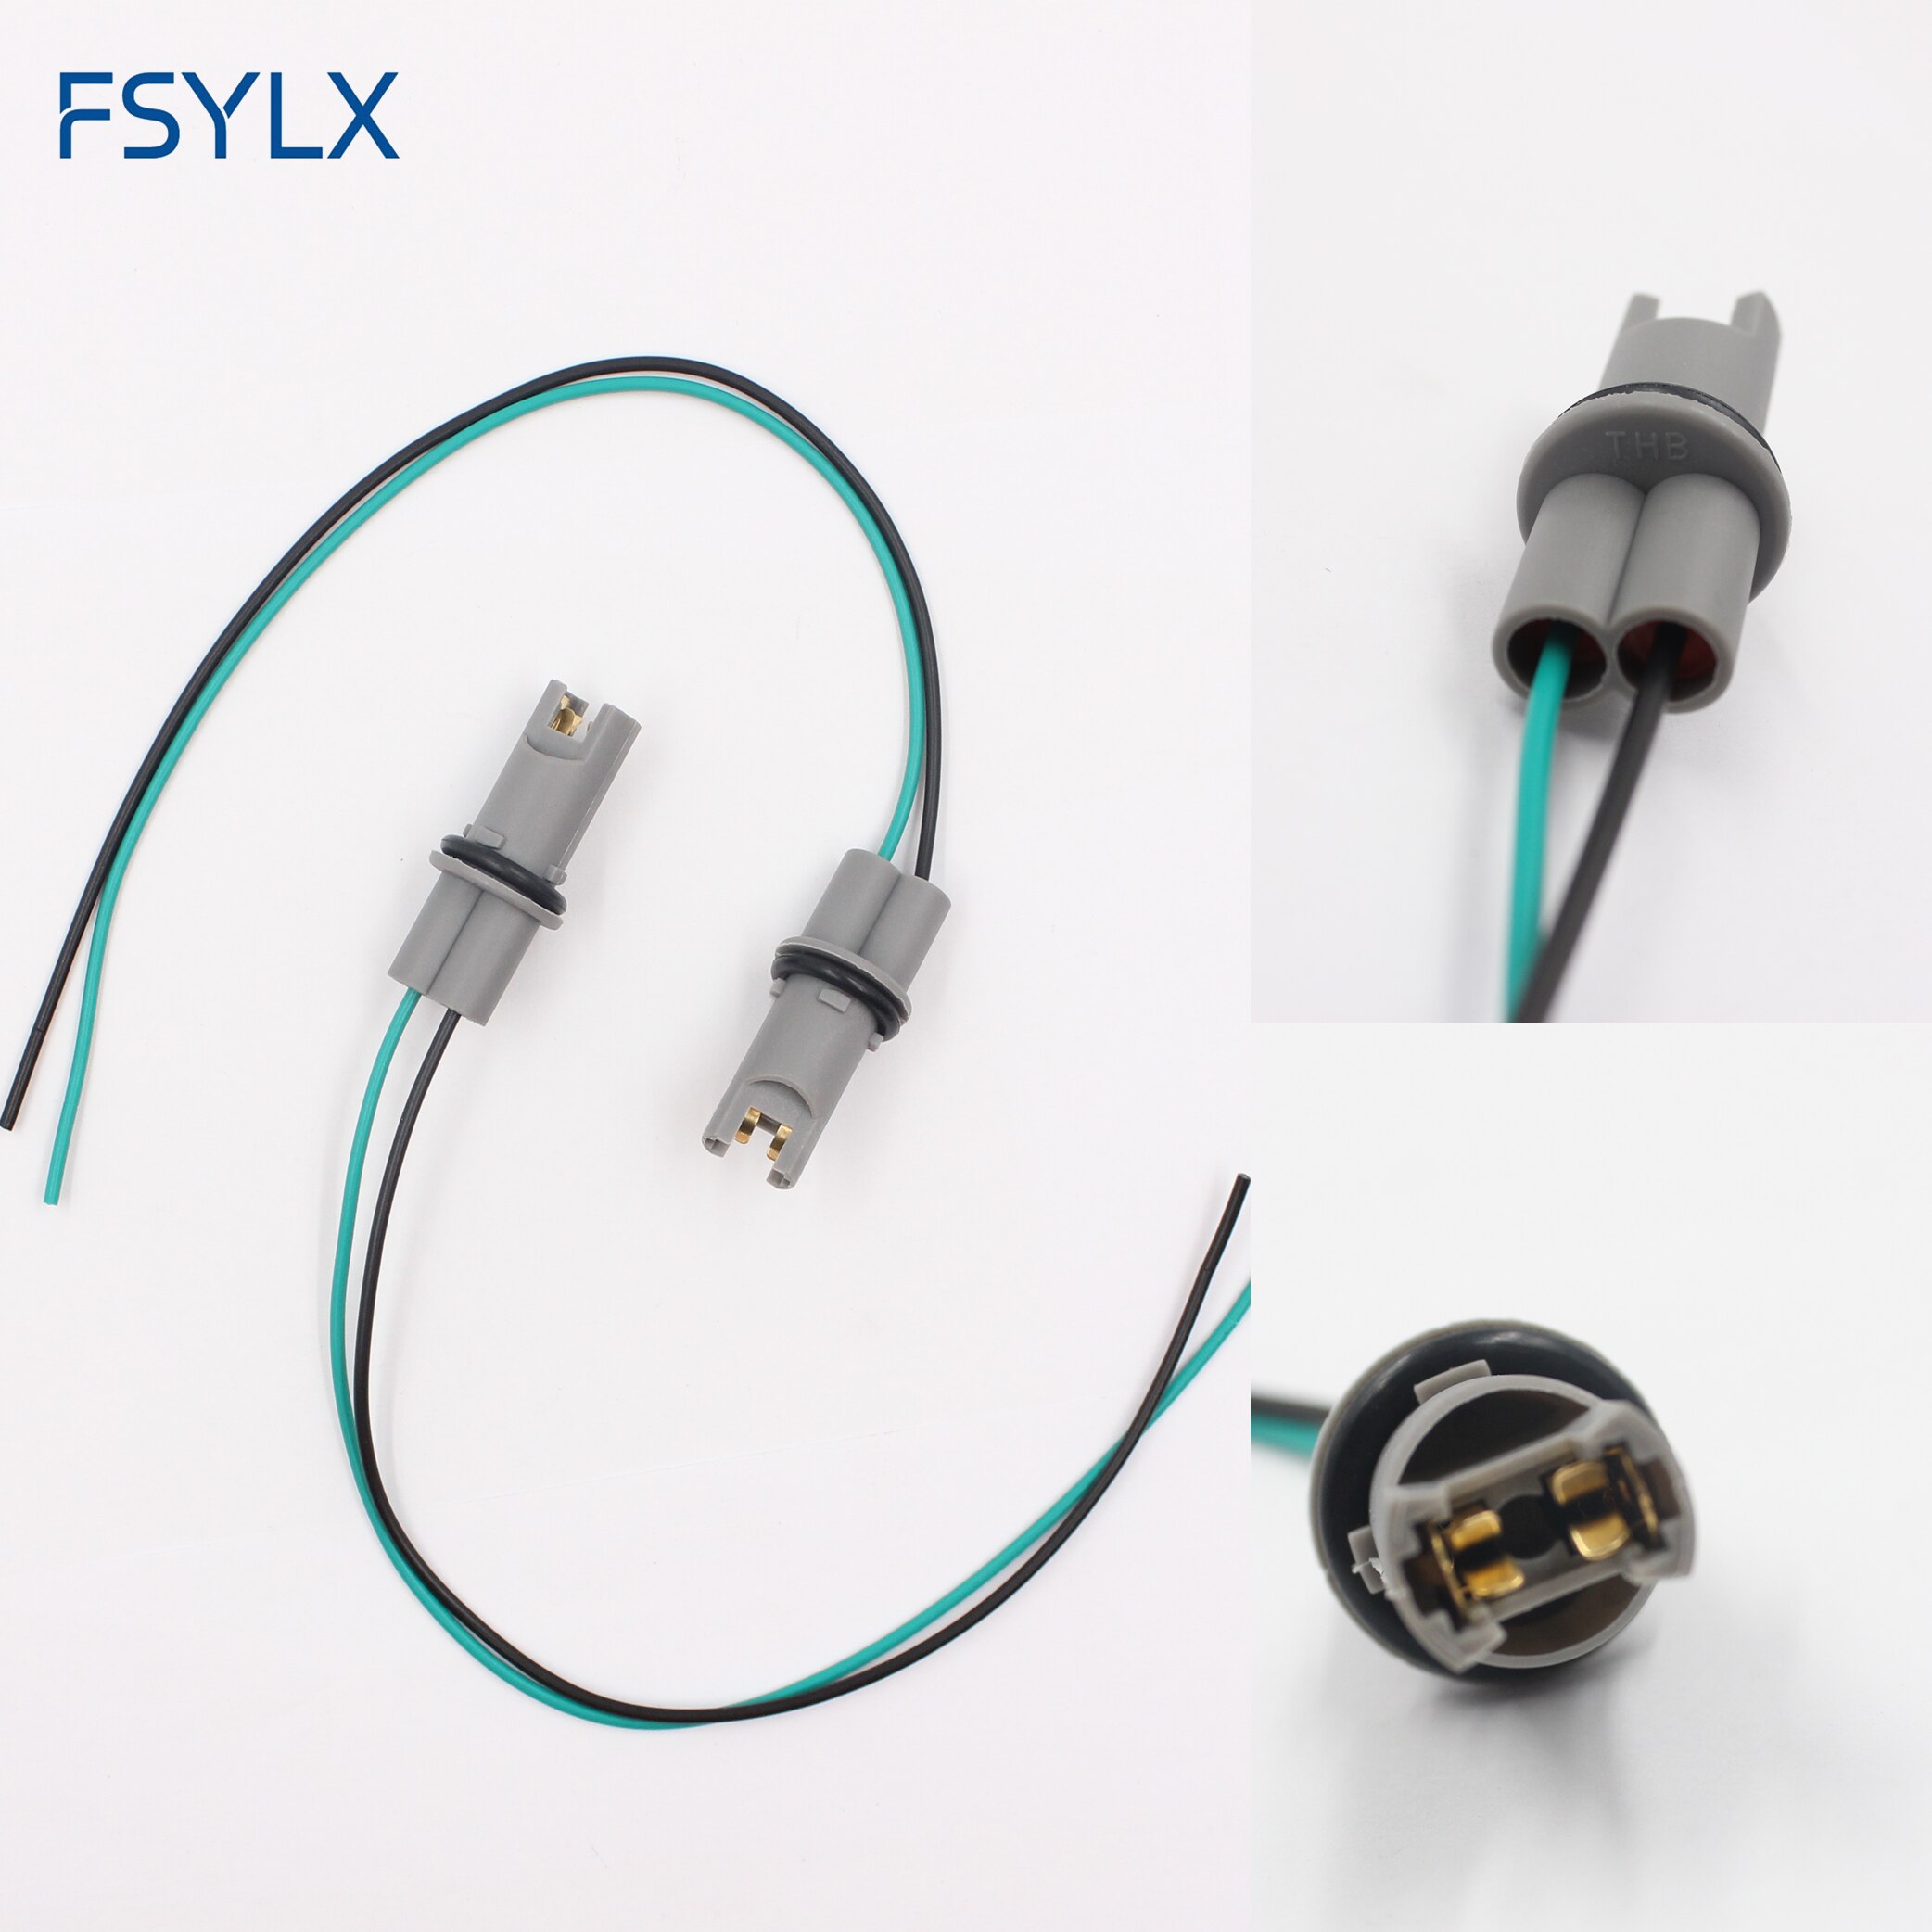 Fsylx Auto Styling Oem 30Cm T10 Led Lamp Socket Houder T15 W5W 194 168 Draad Kabel Adapter Plug Connector t10 Auto Lamp Adapter